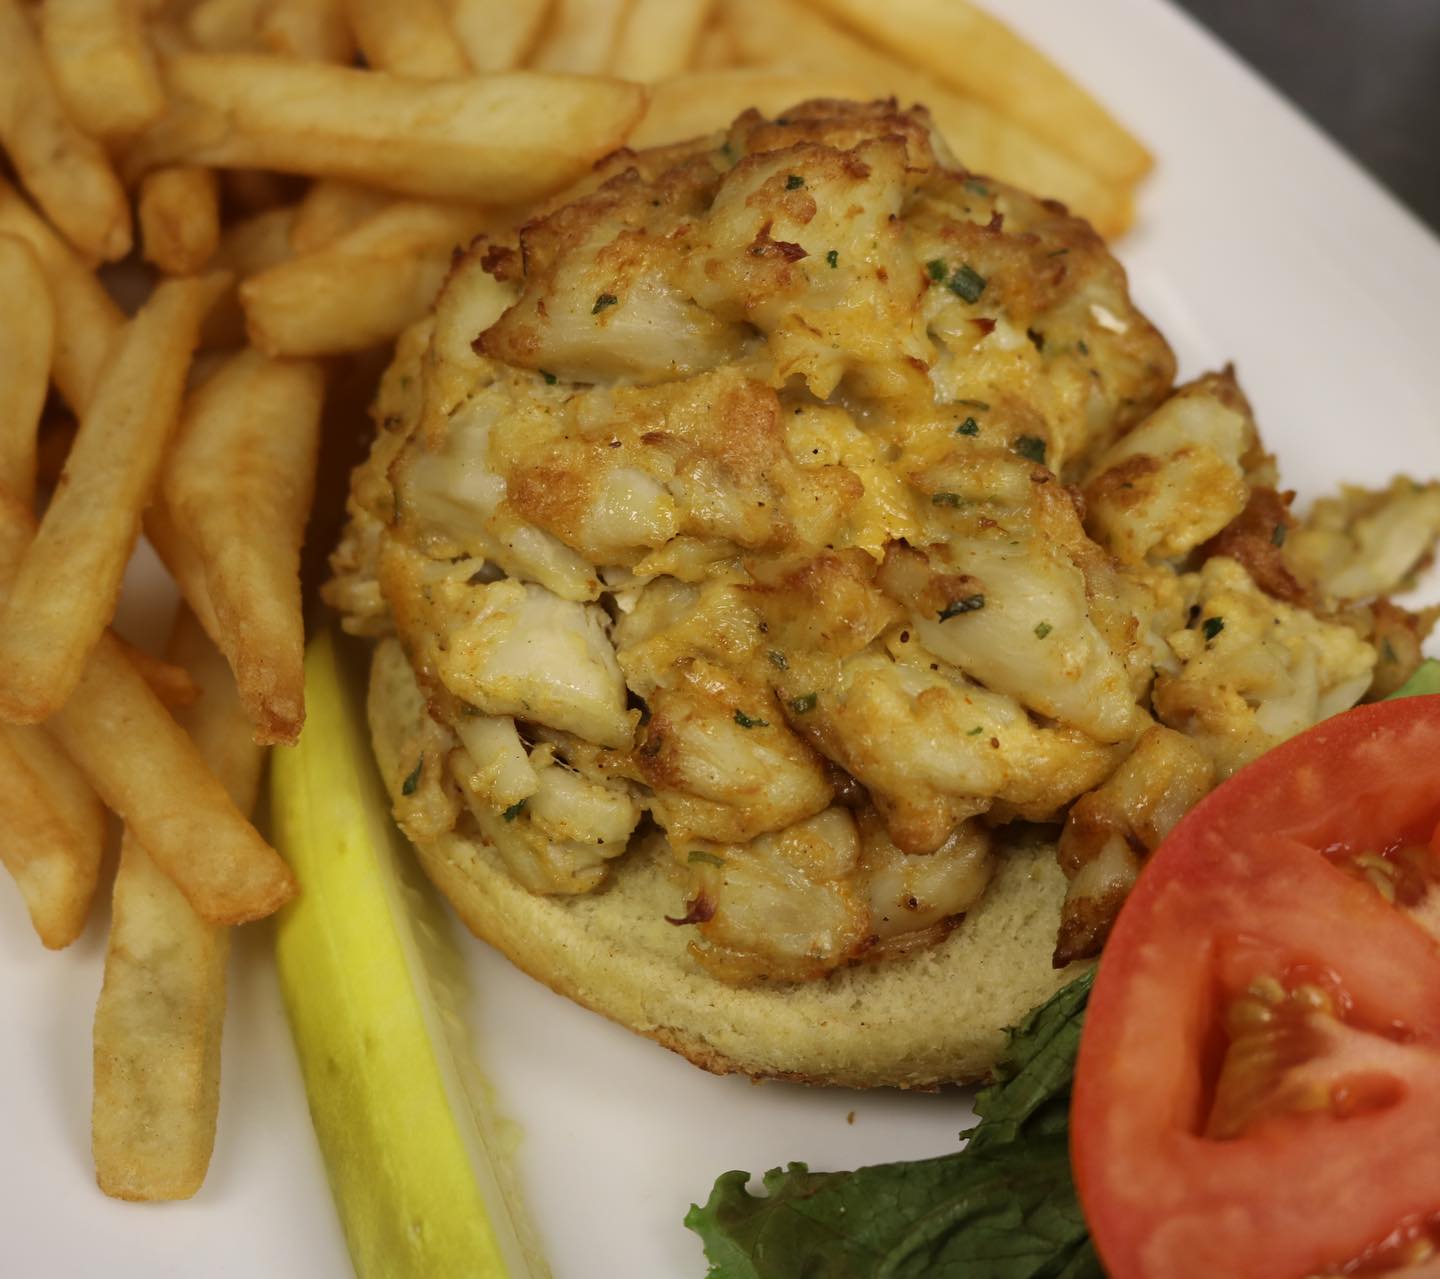 a crab cake sandwich with fries